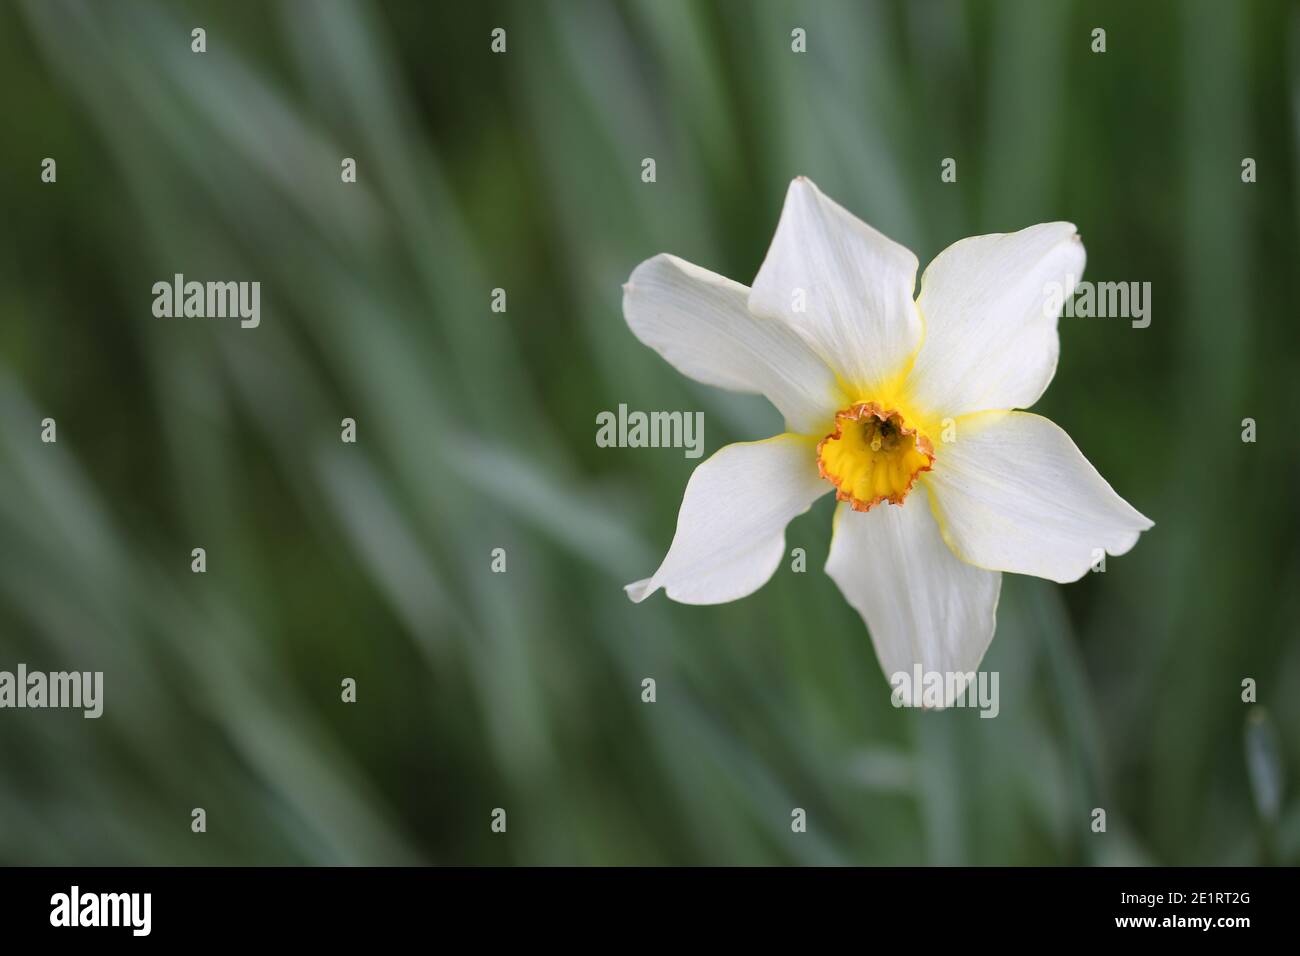 Small cupped daffodil flower with white petals and orange centre cup with red margin and a background of blurred leaves, stems and flowers. Stock Photo